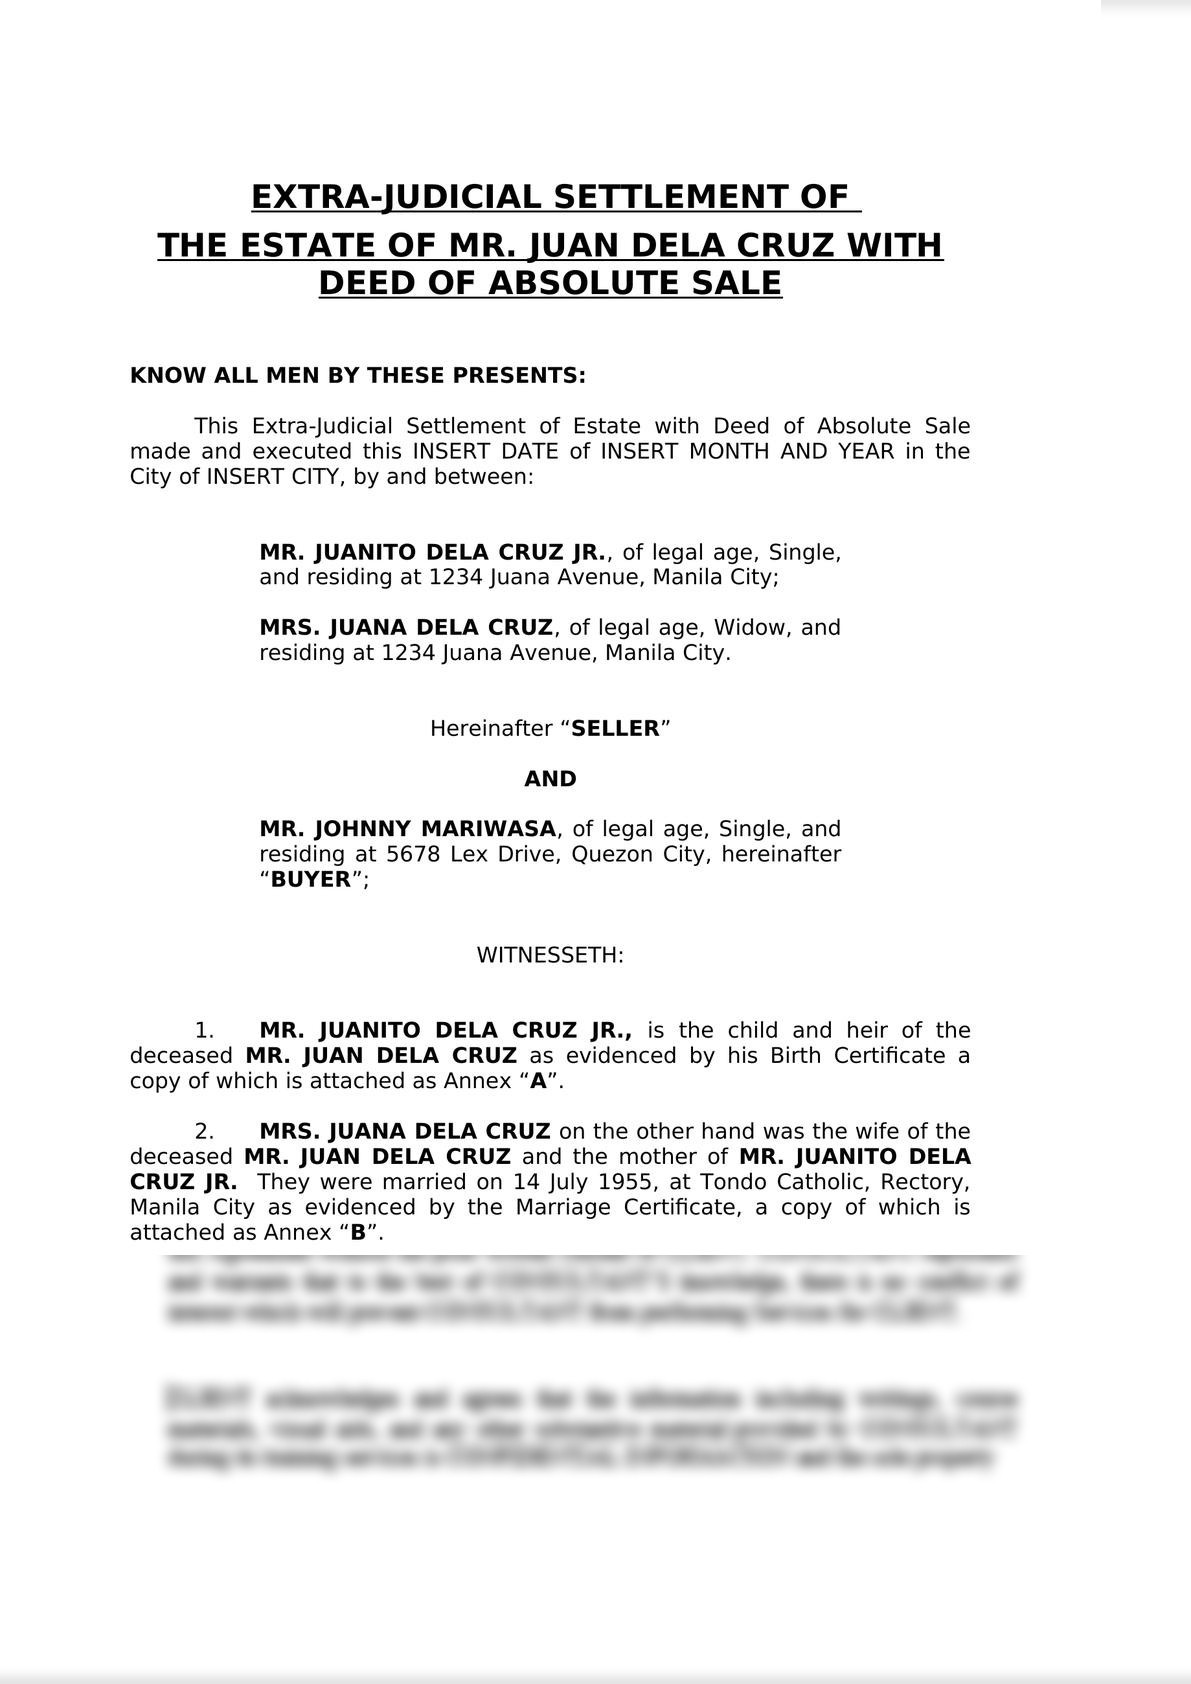 lexub-extra-judicial-settlement-of-estate-with-deed-of-absolute-sale